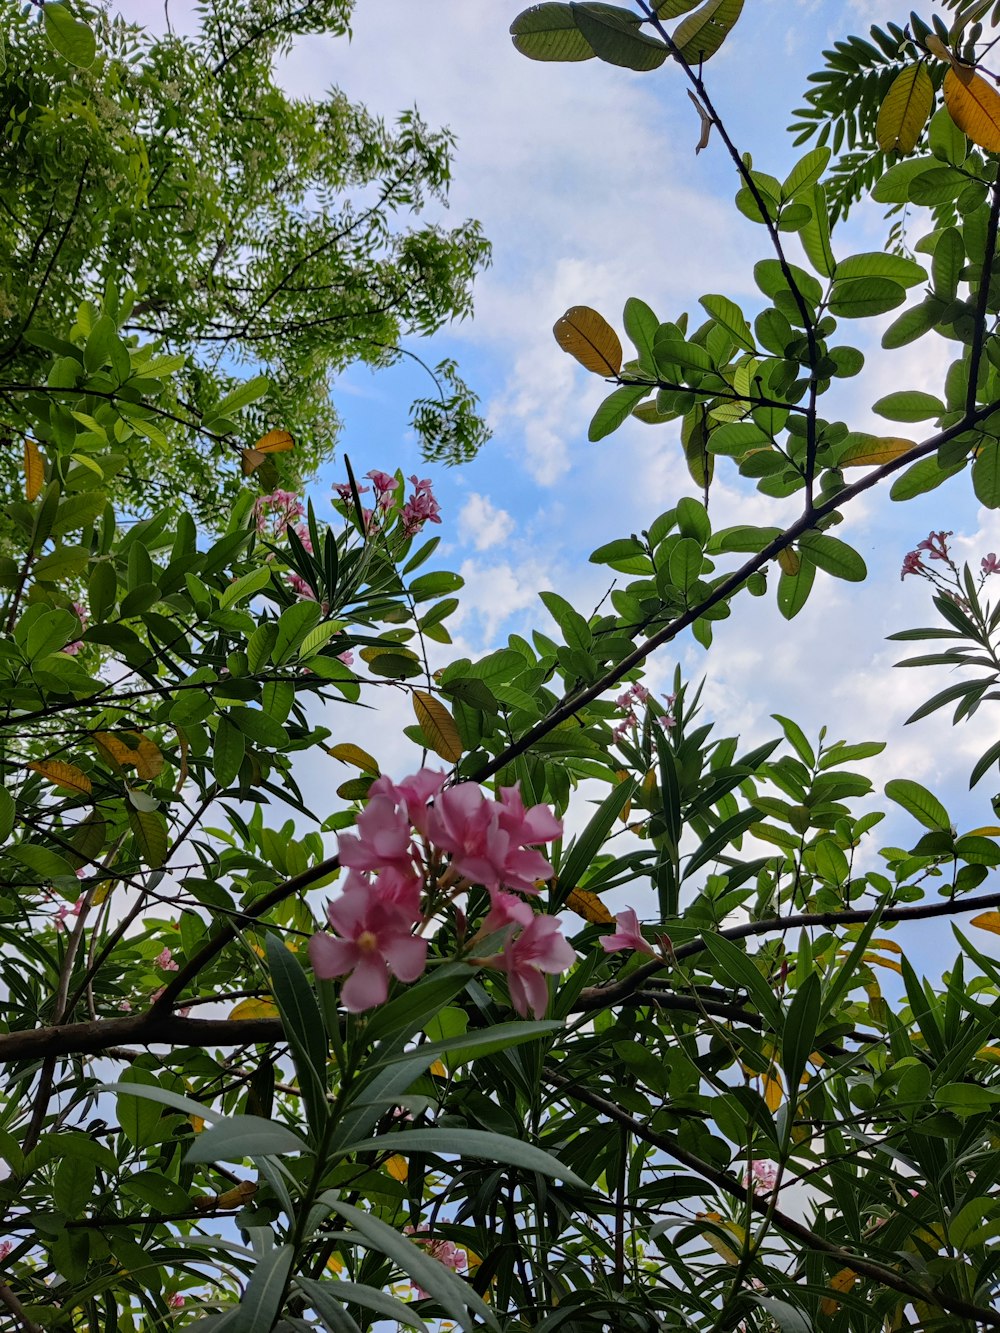 pink flowers are blooming on a tree branch